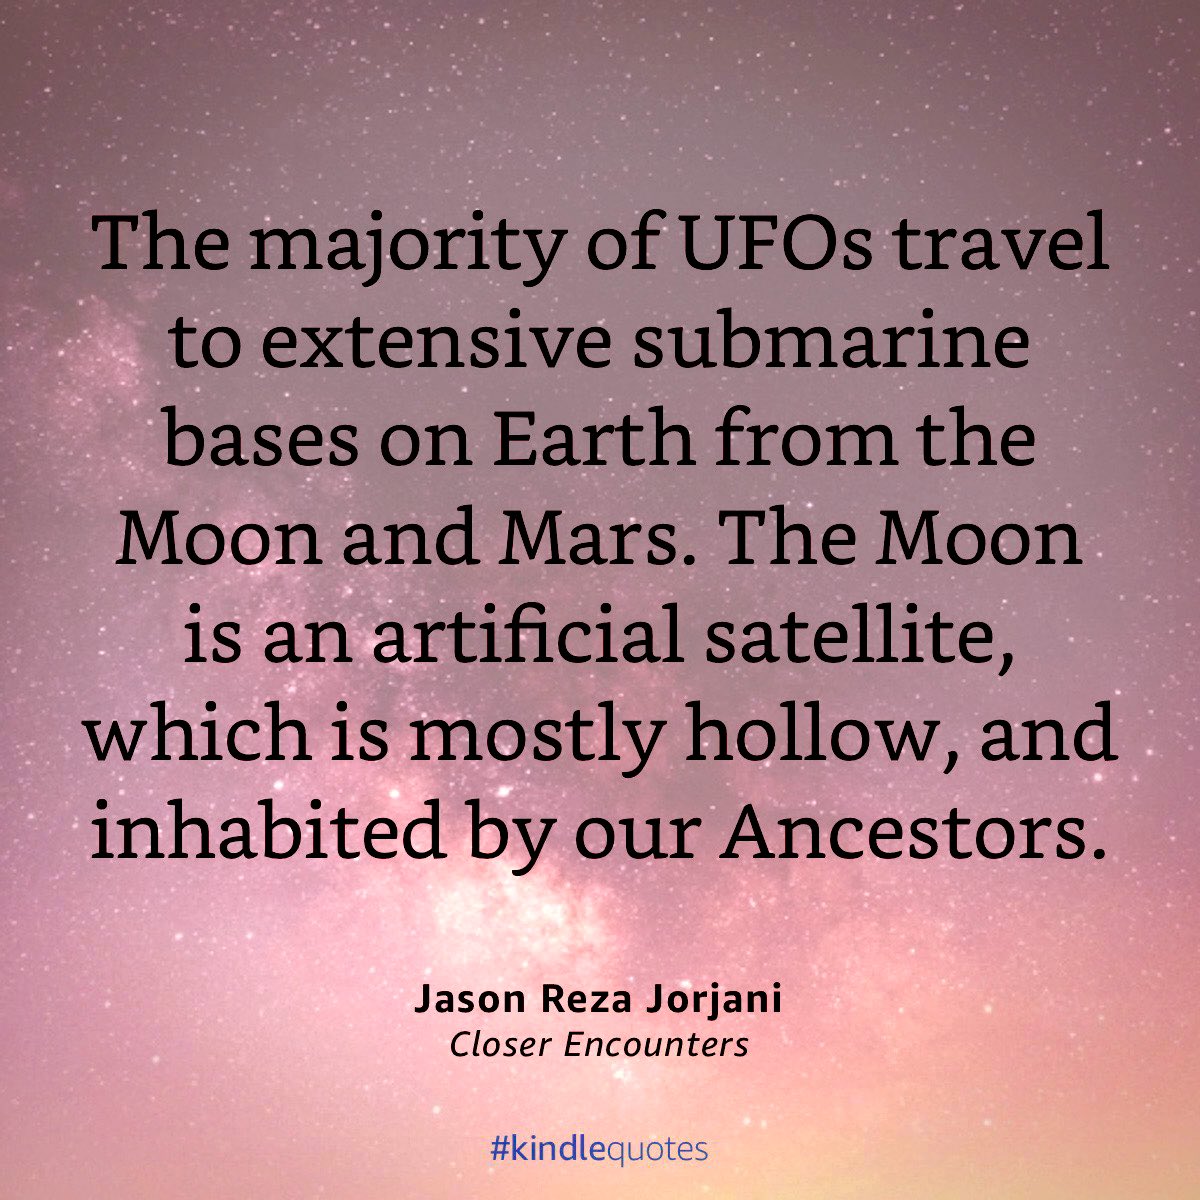 UFOs and their occupants seem to live inside our oceans & underground. 

Are they really from outer space & other planets, or are they from right here, under our noses?

P.S. That moon of ours is looking super sus. 👀

#disclosure #ufotwitter #uapx #ufos #aliens